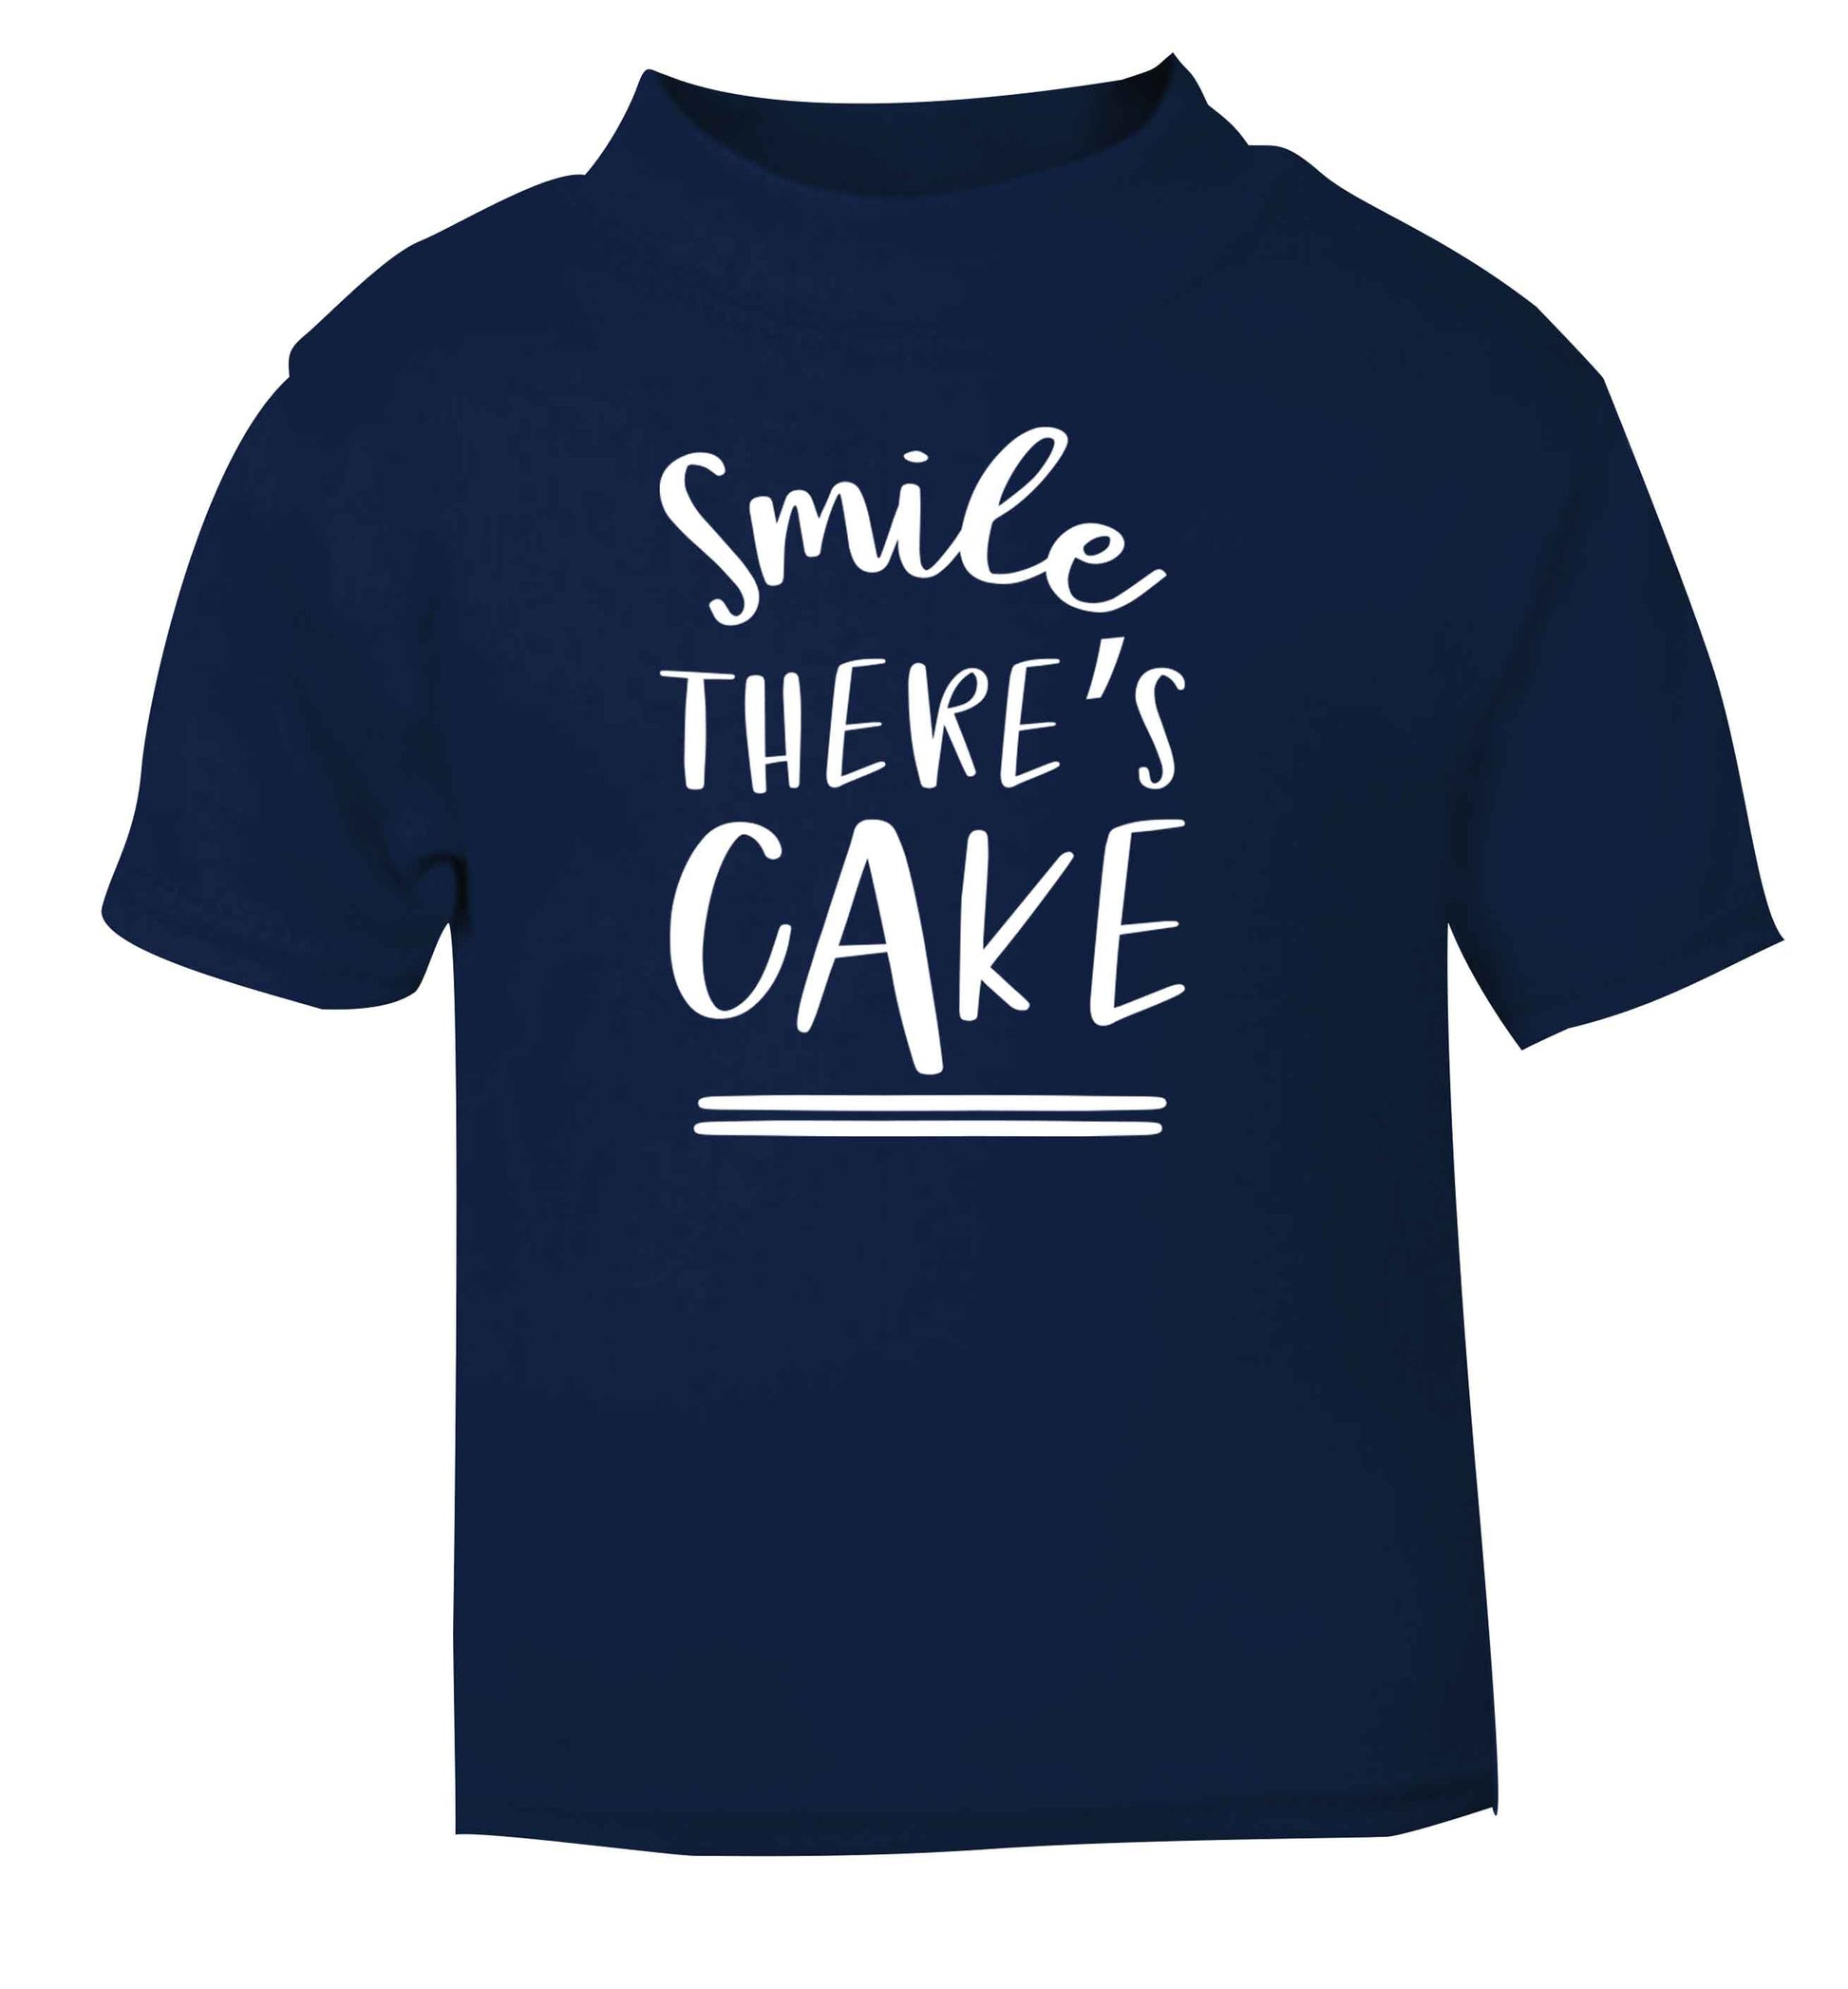 Smile there's cake navy Baby Toddler Tshirt 2 Years